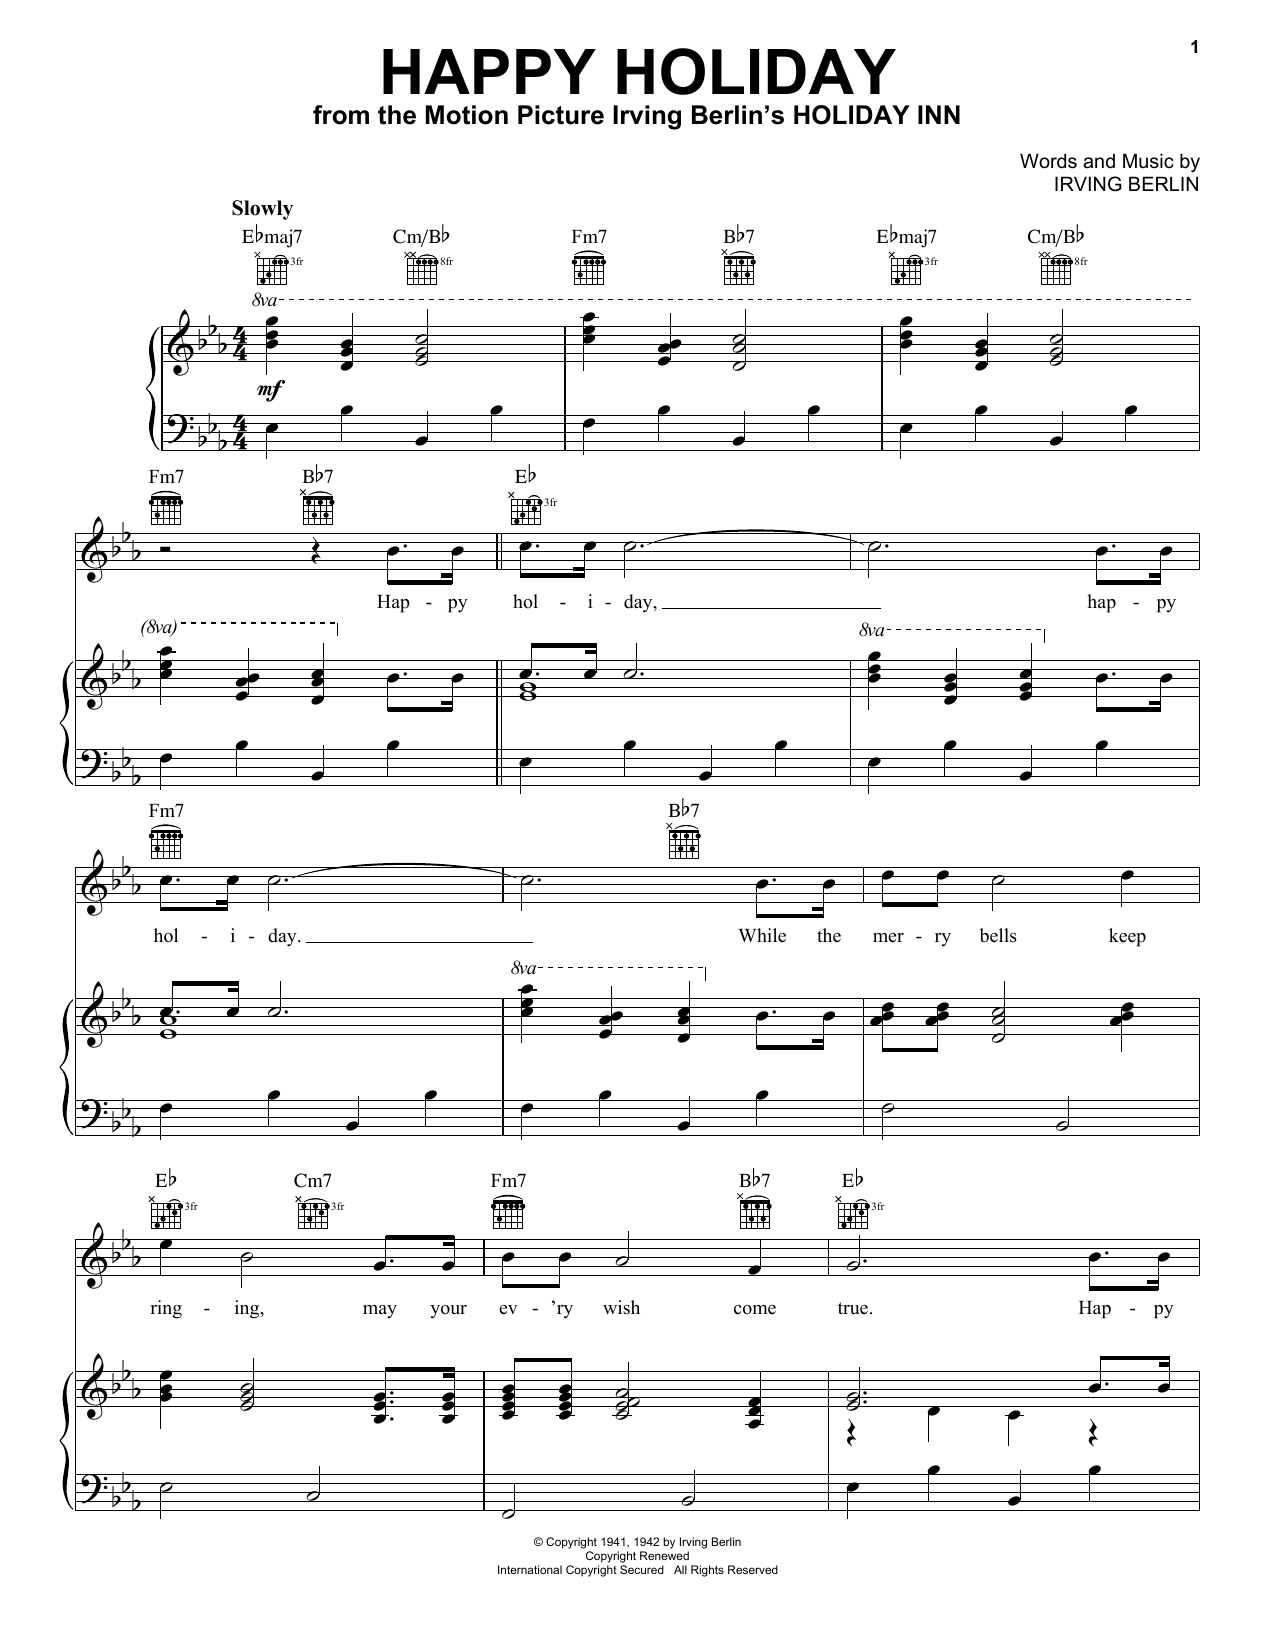 Irving Berlin Happy Holiday sheet music notes printable PDF score